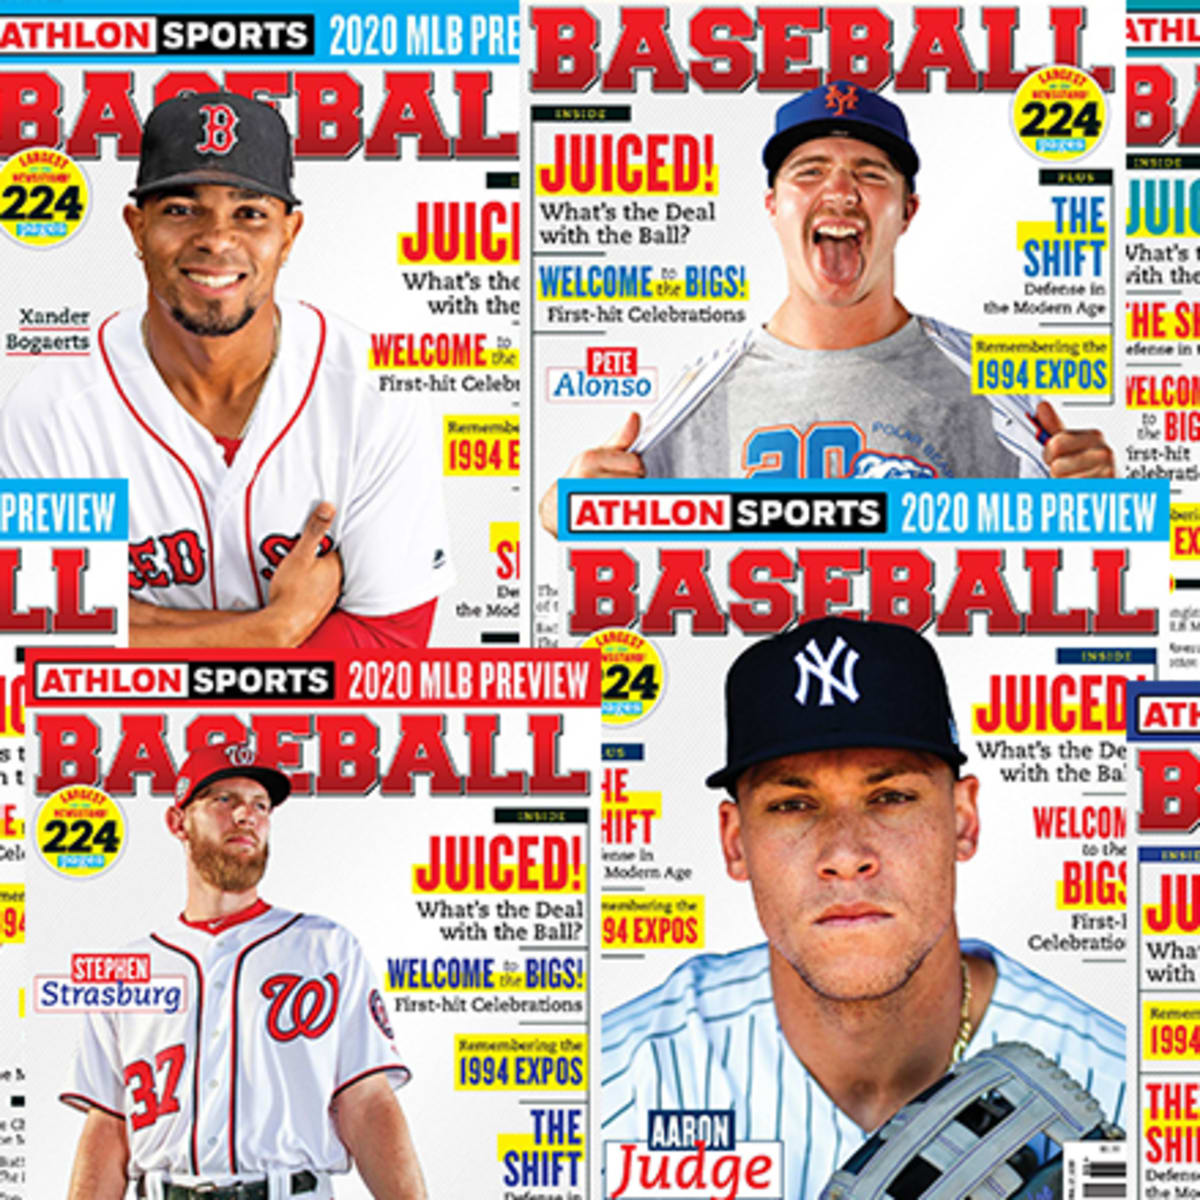 Athlon Sports' 2020 Baseball Preview Magazine is Available Now 